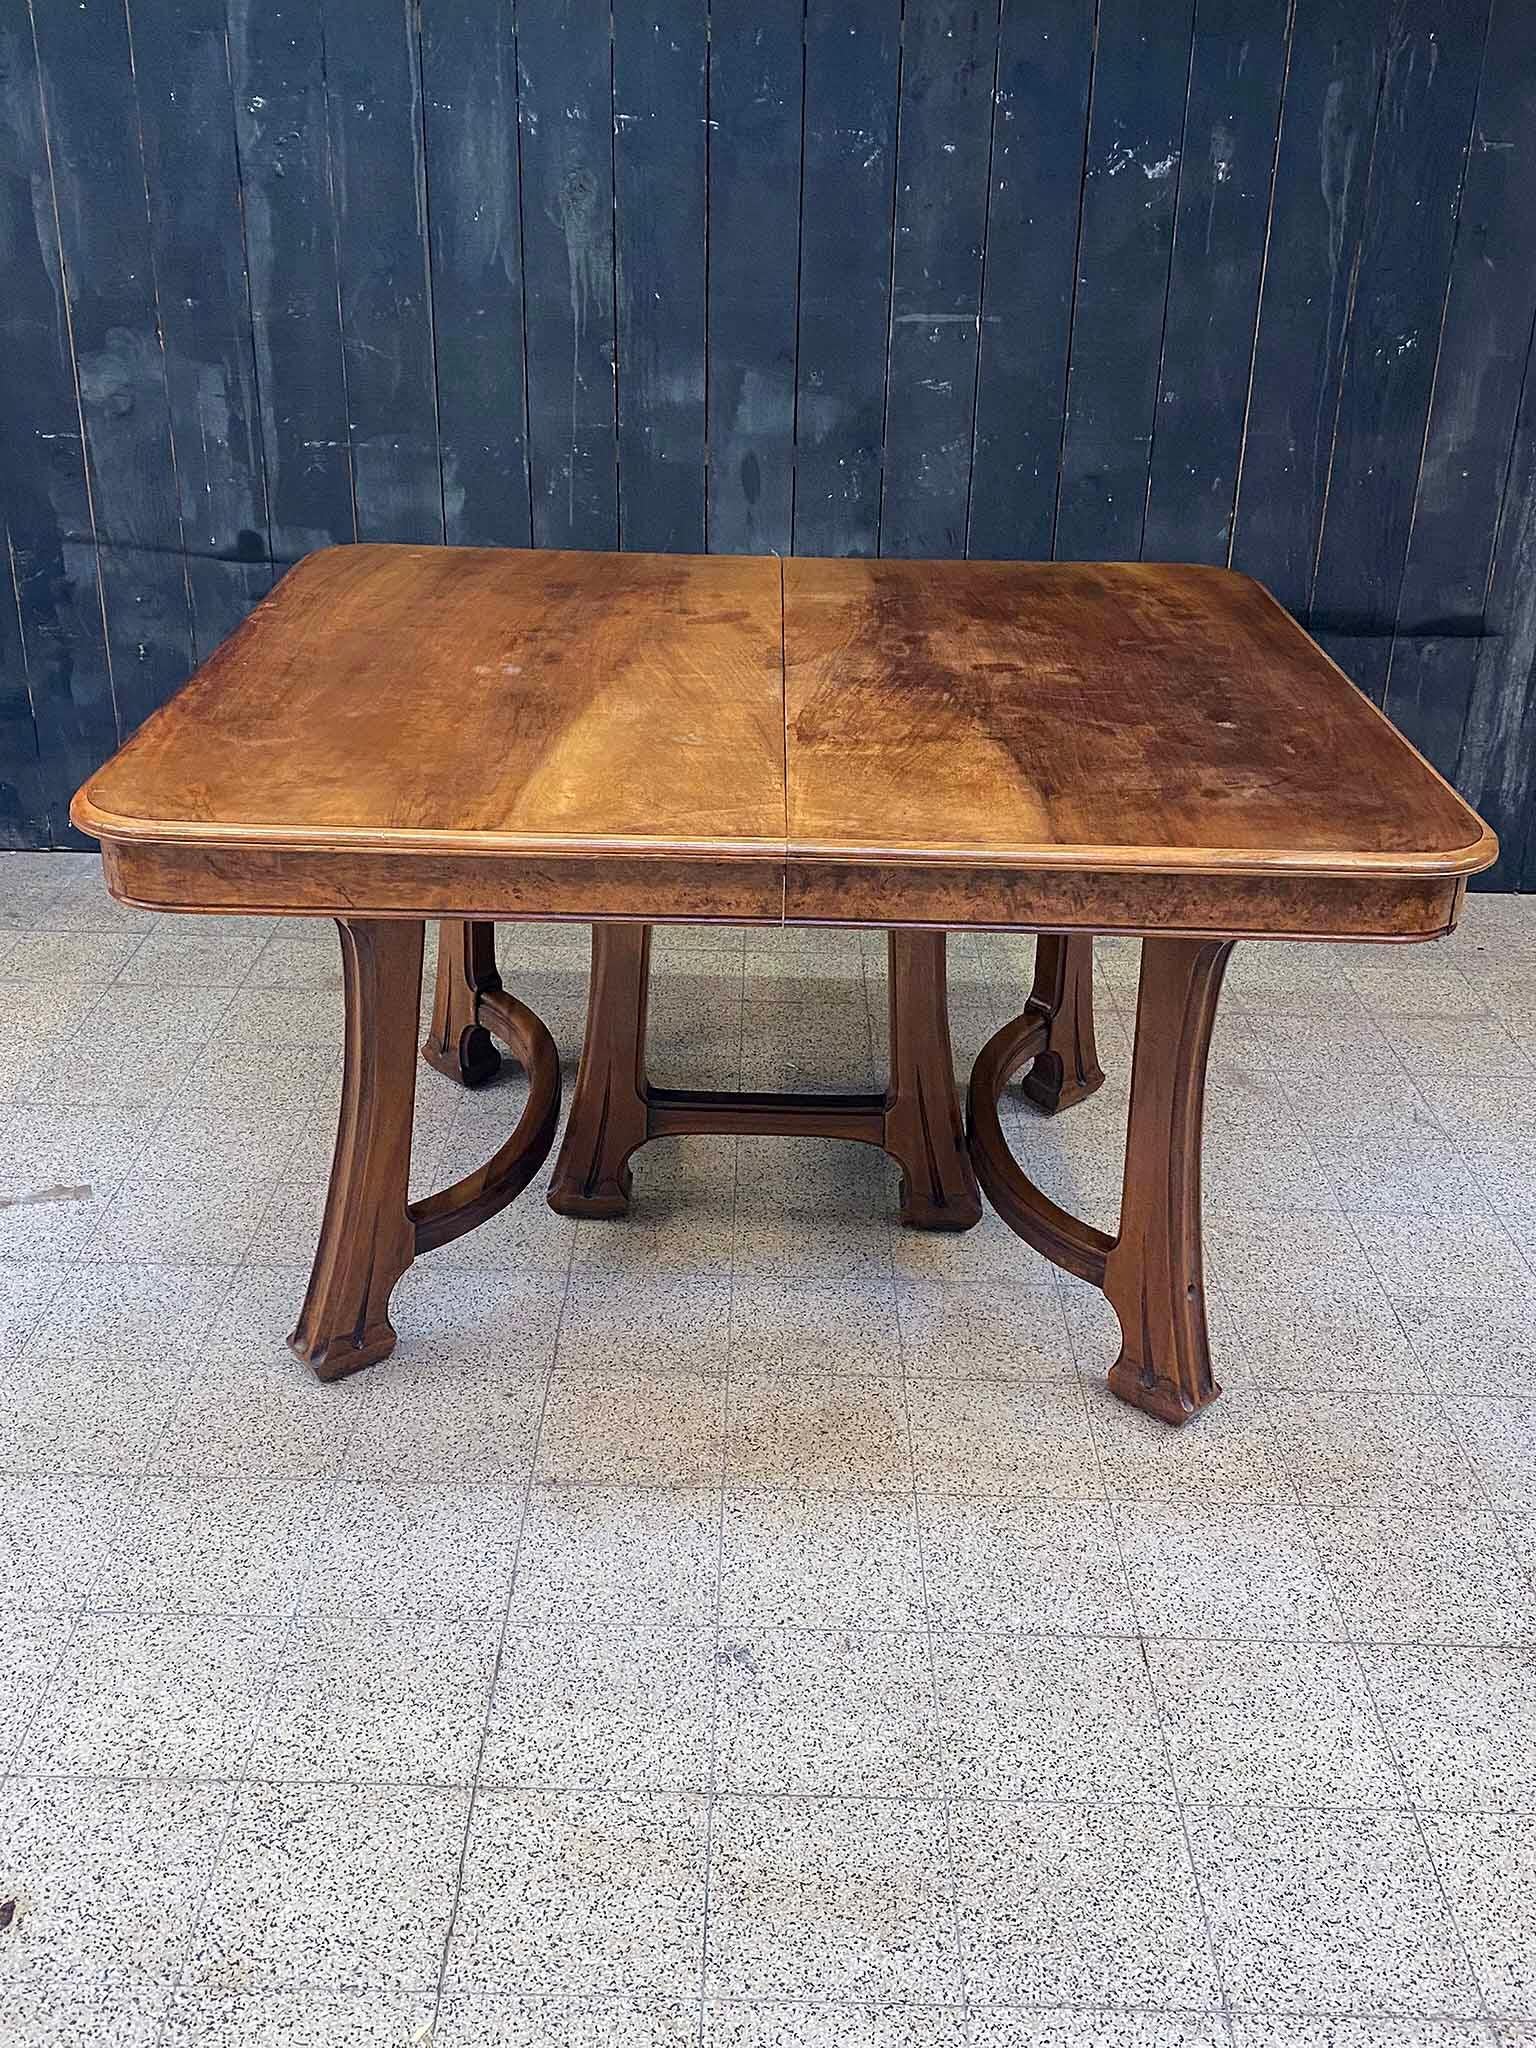 Attributed to Gauthier-Poinsignon & Cie, dining room table in walnut and elm burl veneer.
Table measures: 115 x 131 cm, H. 74.5 cm.
Varnish to be redone, extensions in raw wood.
6 Chairs and 2 buffets on the model available.
 